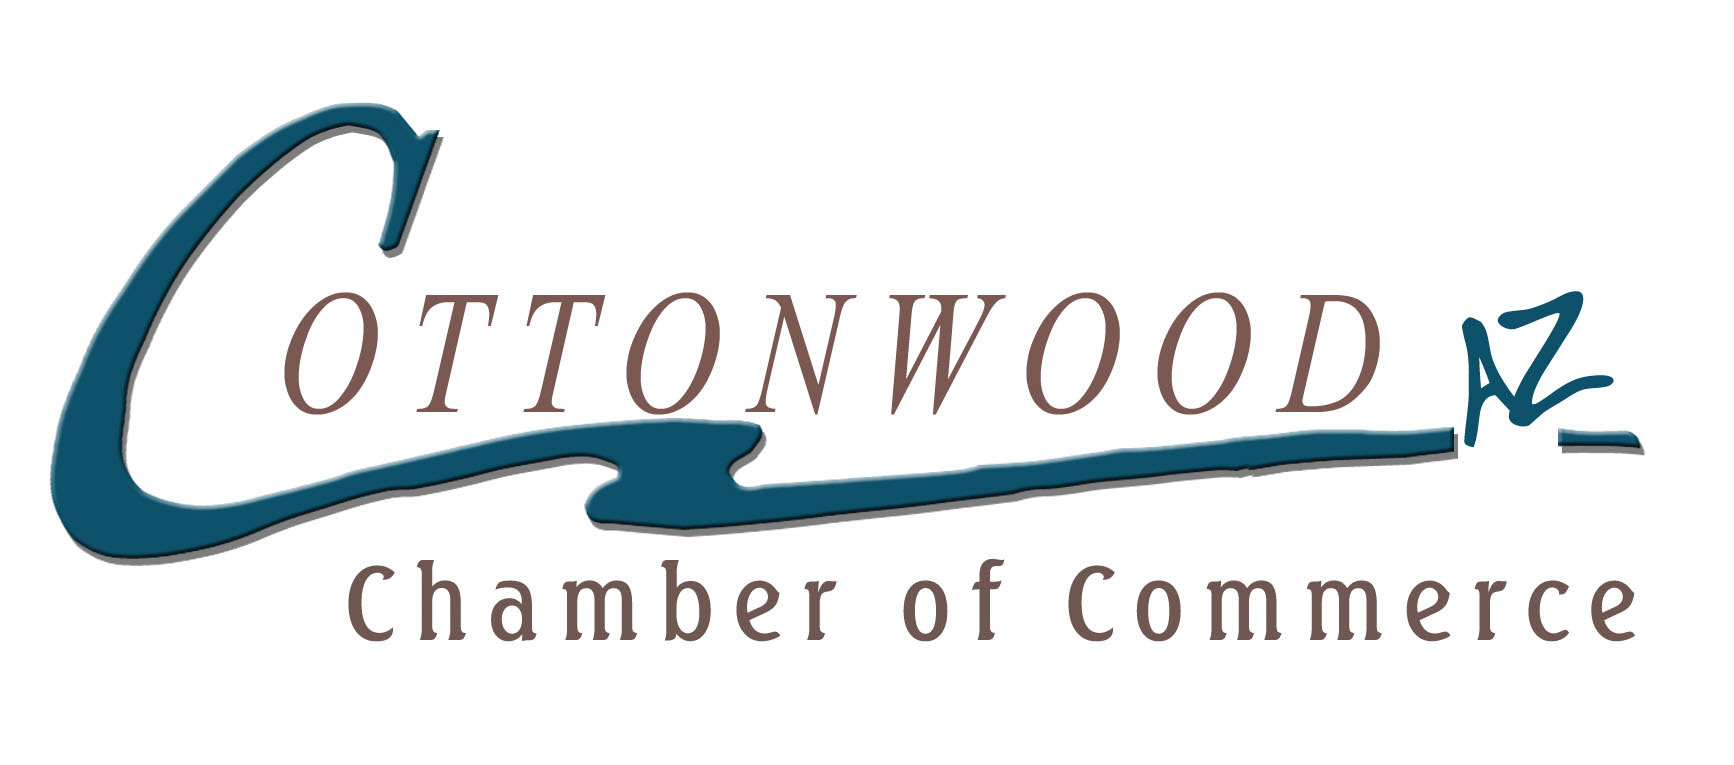 Cottonwood Chamber scraps all upcoming programs | The Verde Independent | Cottonwood, AZ